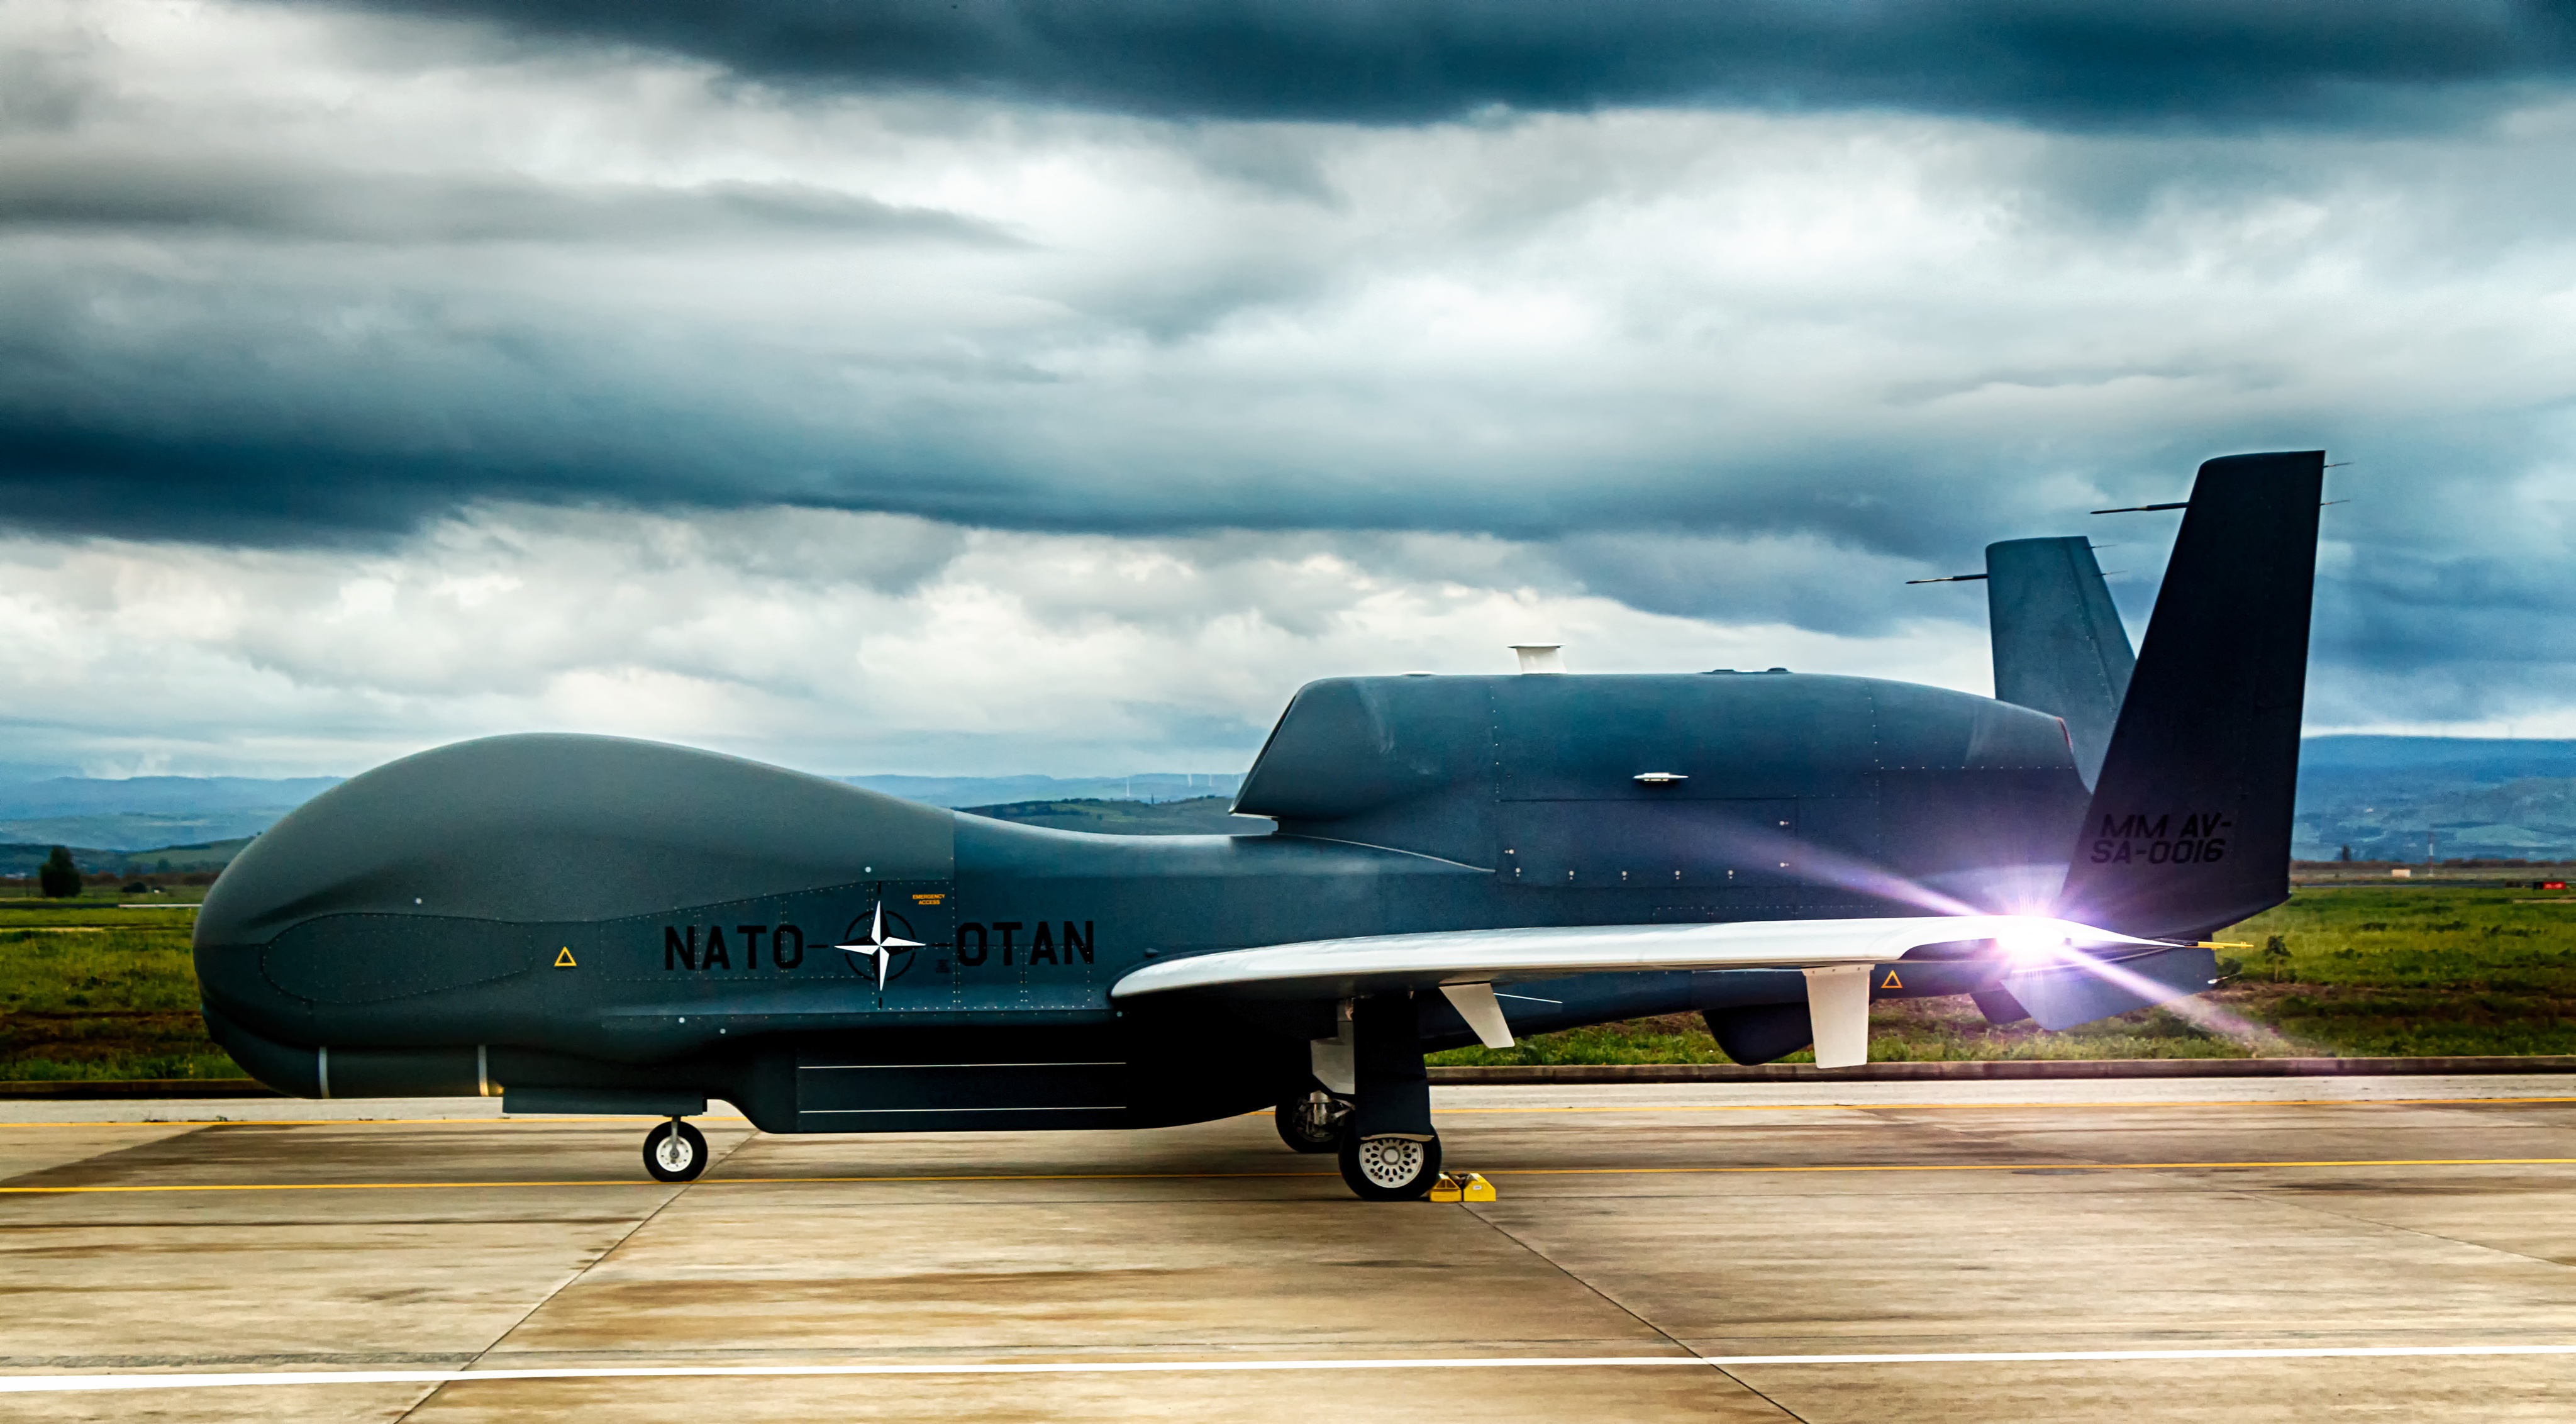 NATO Alliance Ground Surveillance RQ-4D remotely piloted aircraft on the runway at Sigonella Air Base, Italy. 